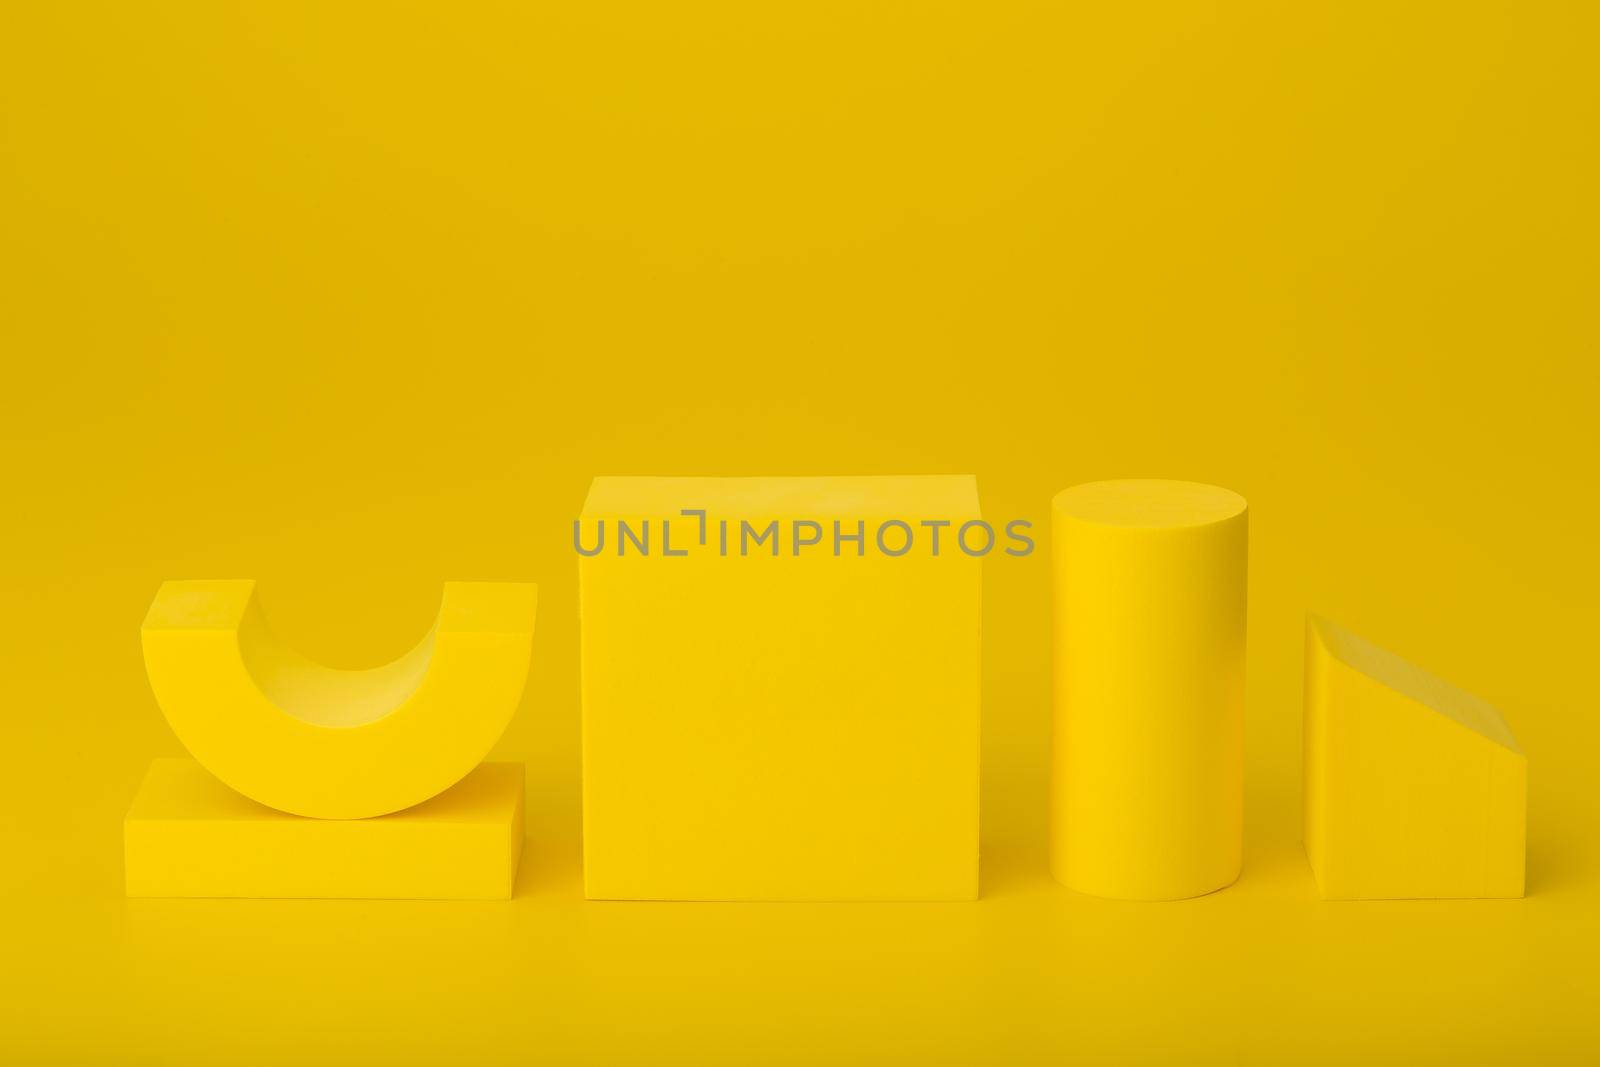 Yellow monochromatic abstract background with copy space. Geometric composition with yellow geometric figures against yellow background.